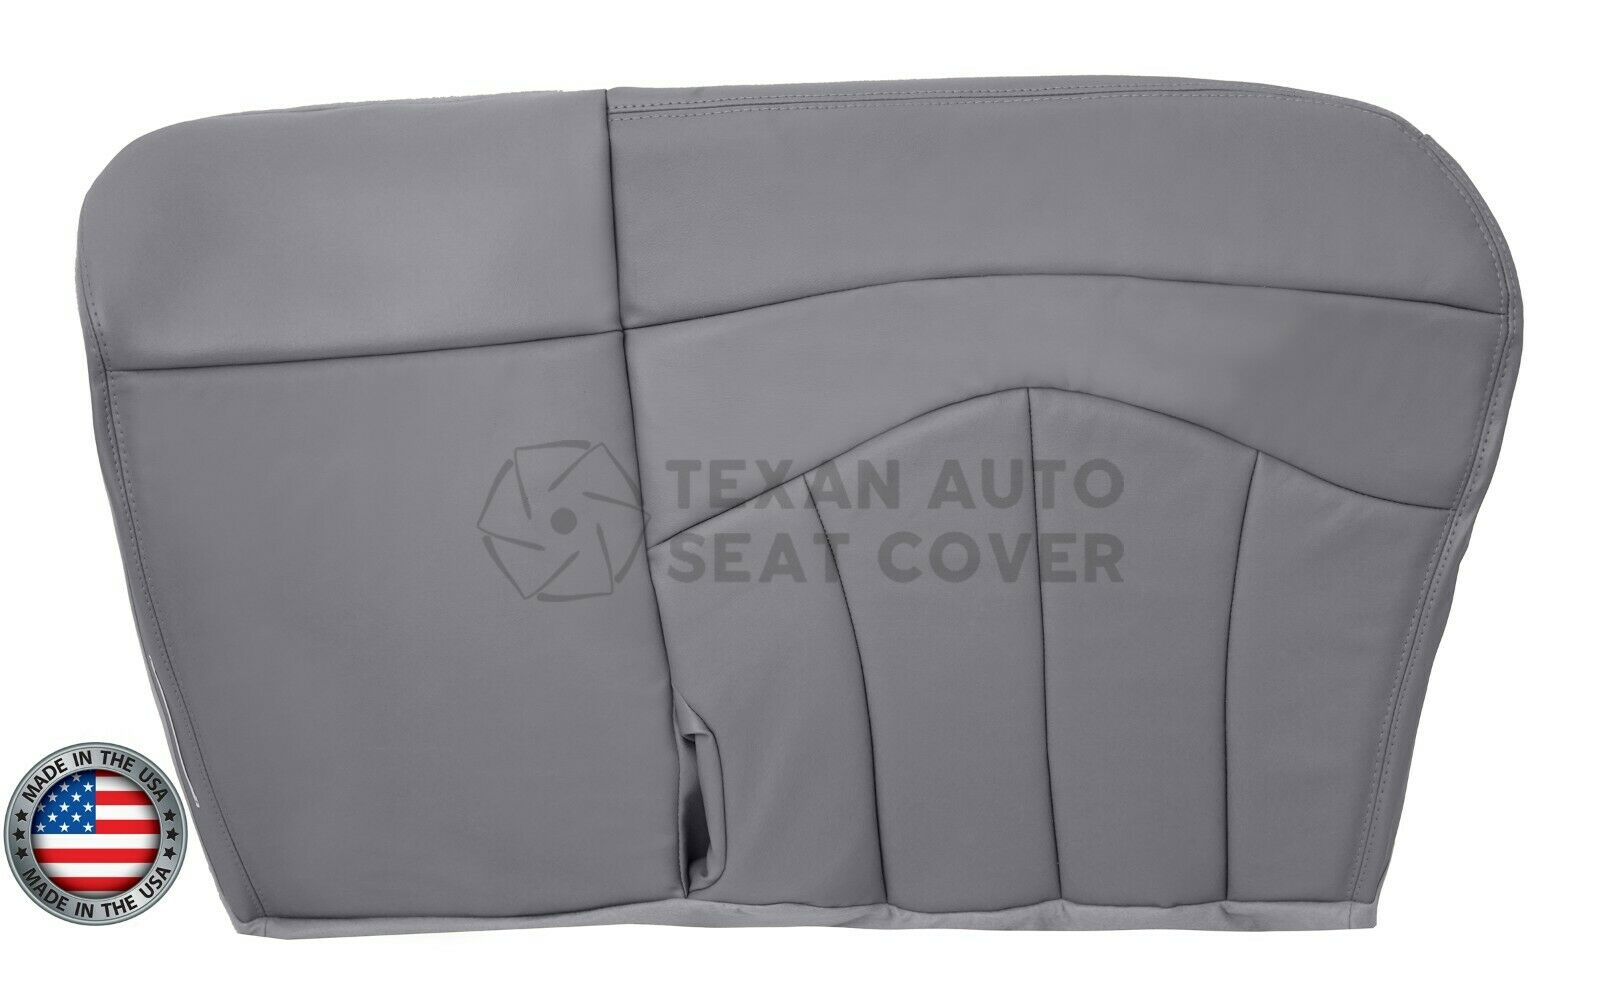 1999, 2000, 2001 Ford F150 Lariat Passenger Bench Synthetic Leather Seat Cover Gray 60/40